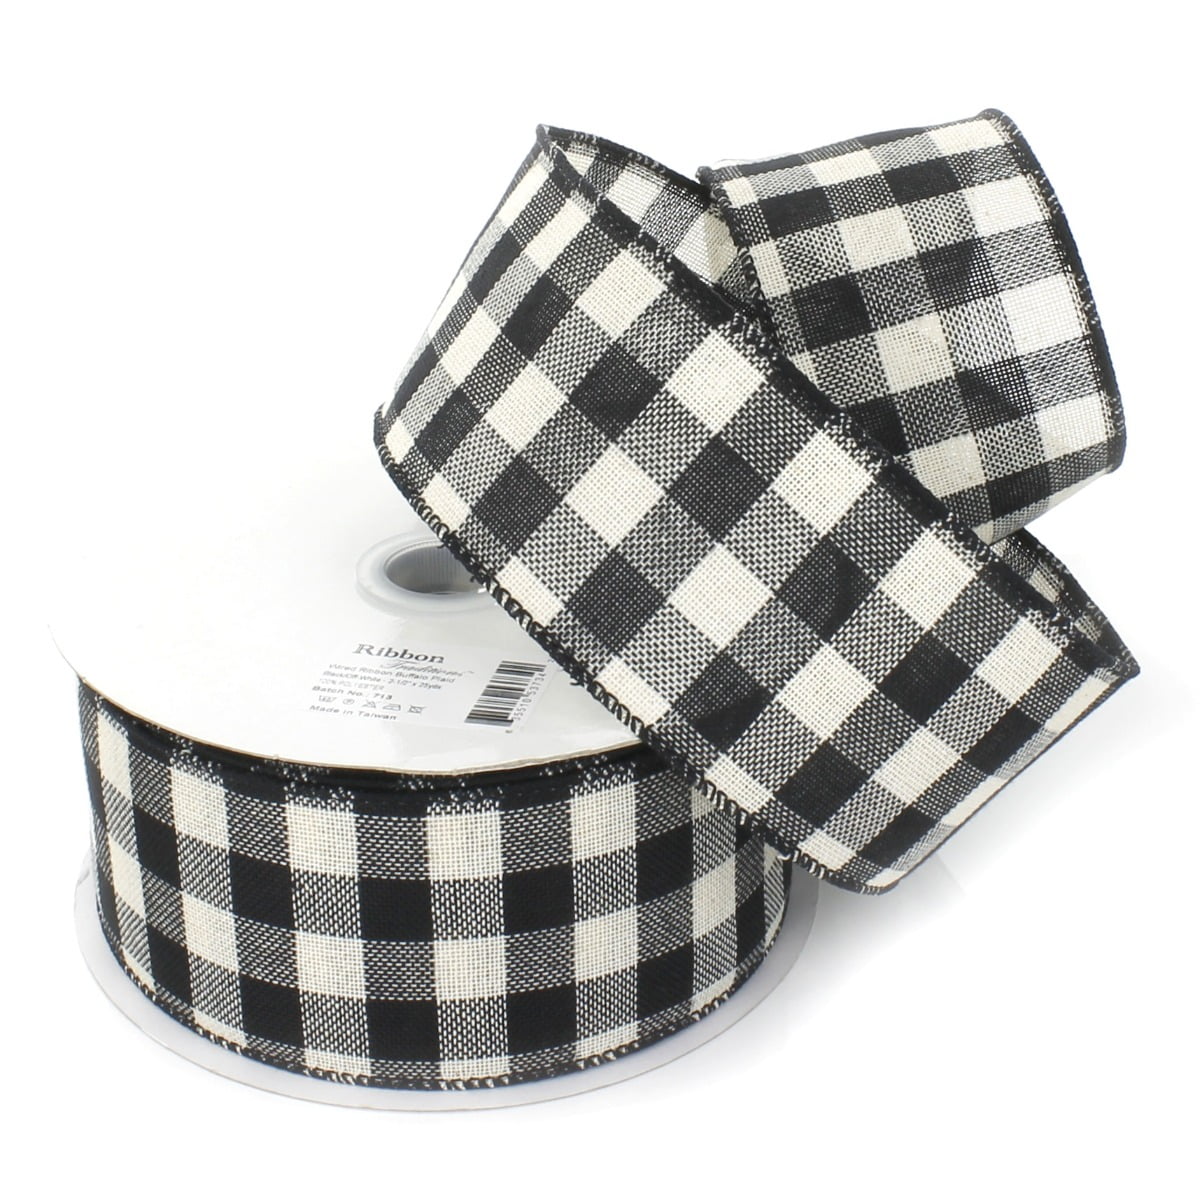 25 Yards Full Roll Buffalo Plaid heavy gauge Wired Ribbon 2-1/2" Choose Color 